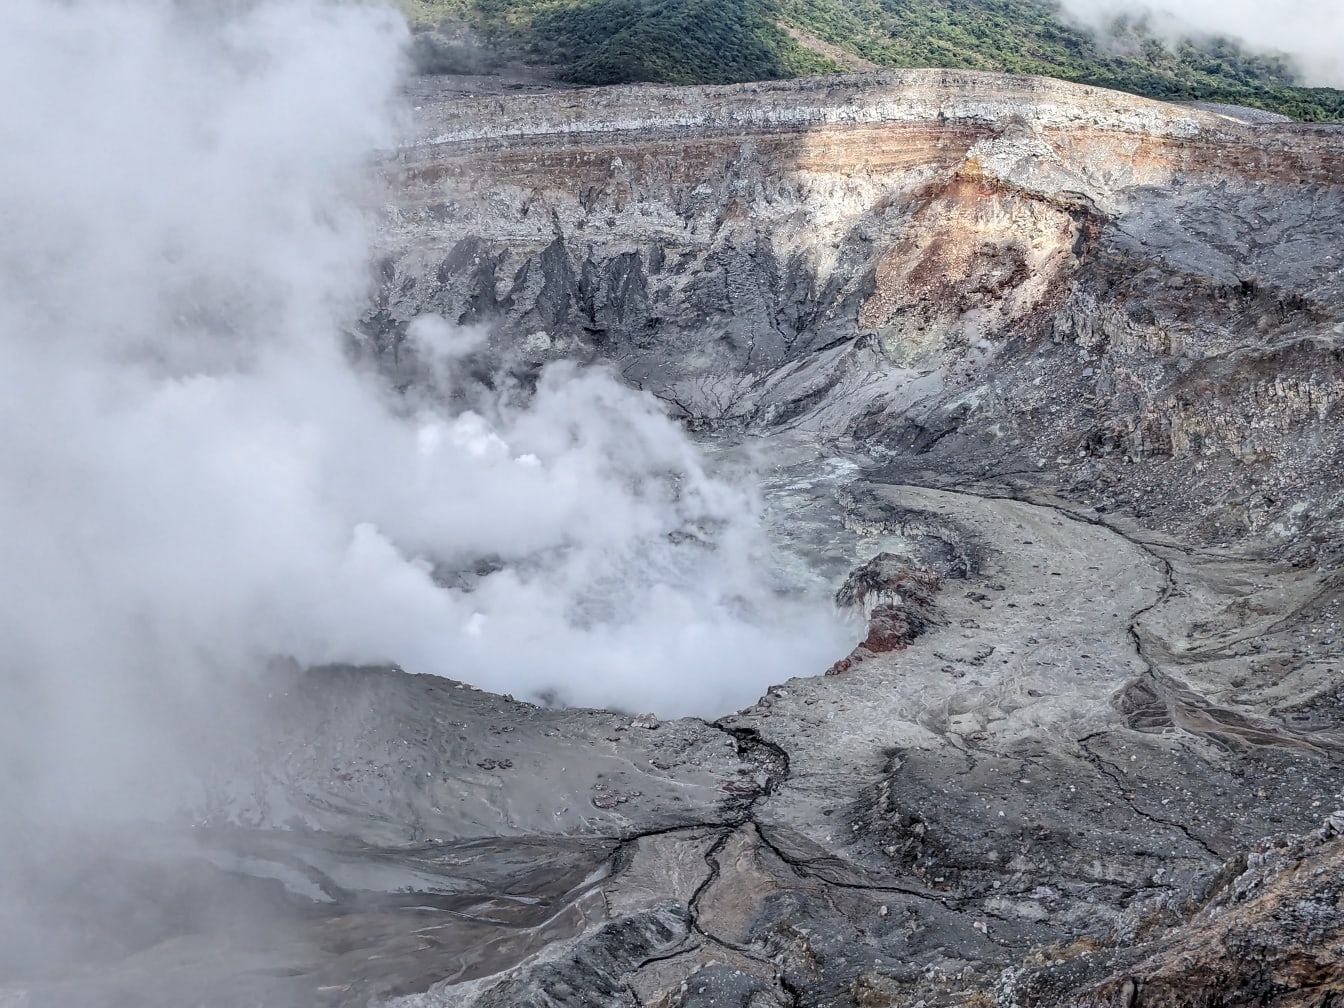 Poás volcano crater in Costa Rica with steam coming out of it